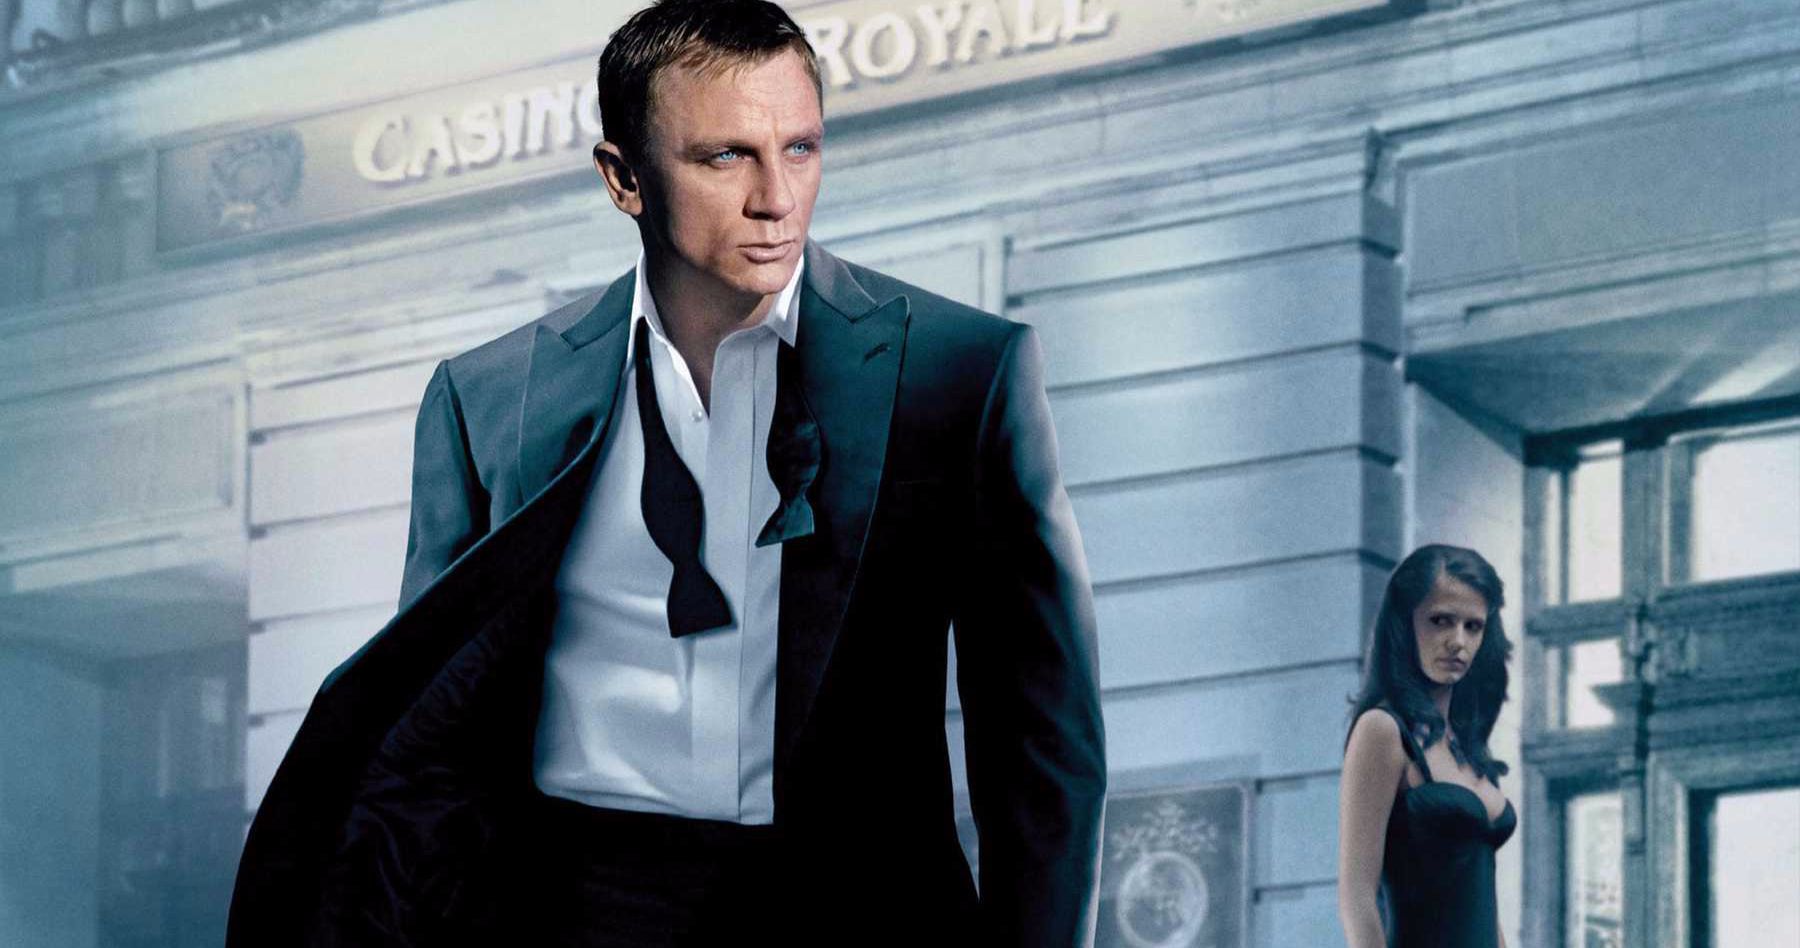 Casino Royale Cut Streaming on HBO Max Is Longer and More Violent Than Theatrical Cut